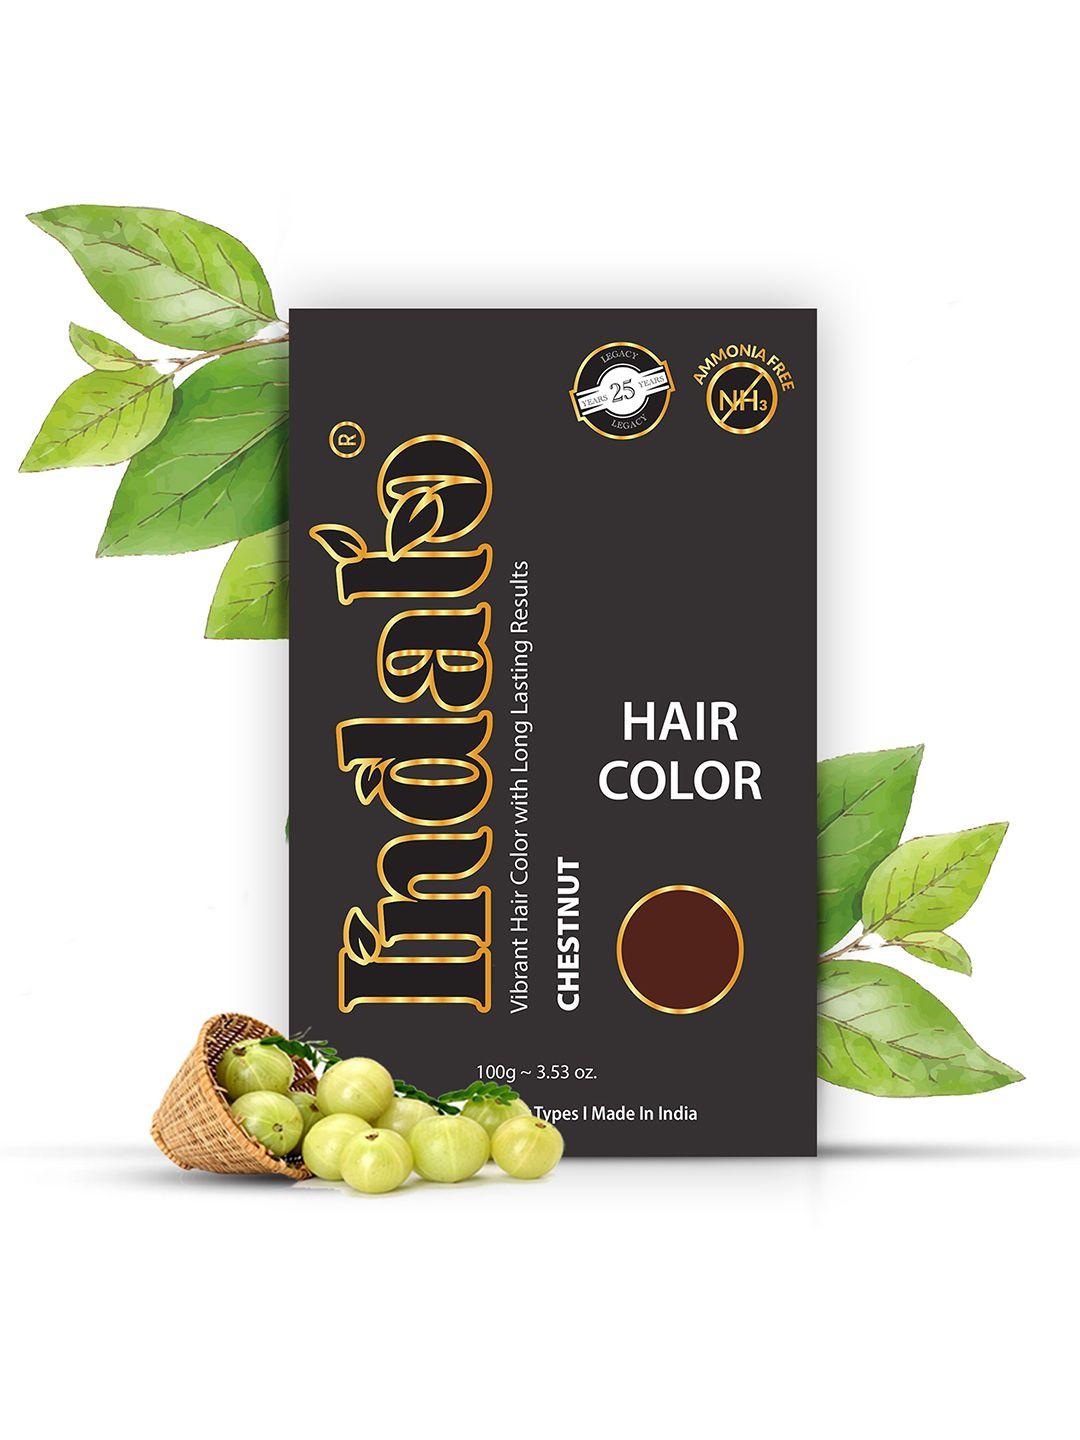 indalo set of 3 ammonia-free vibrant hair color with natural ingredient 100g each-chestnut